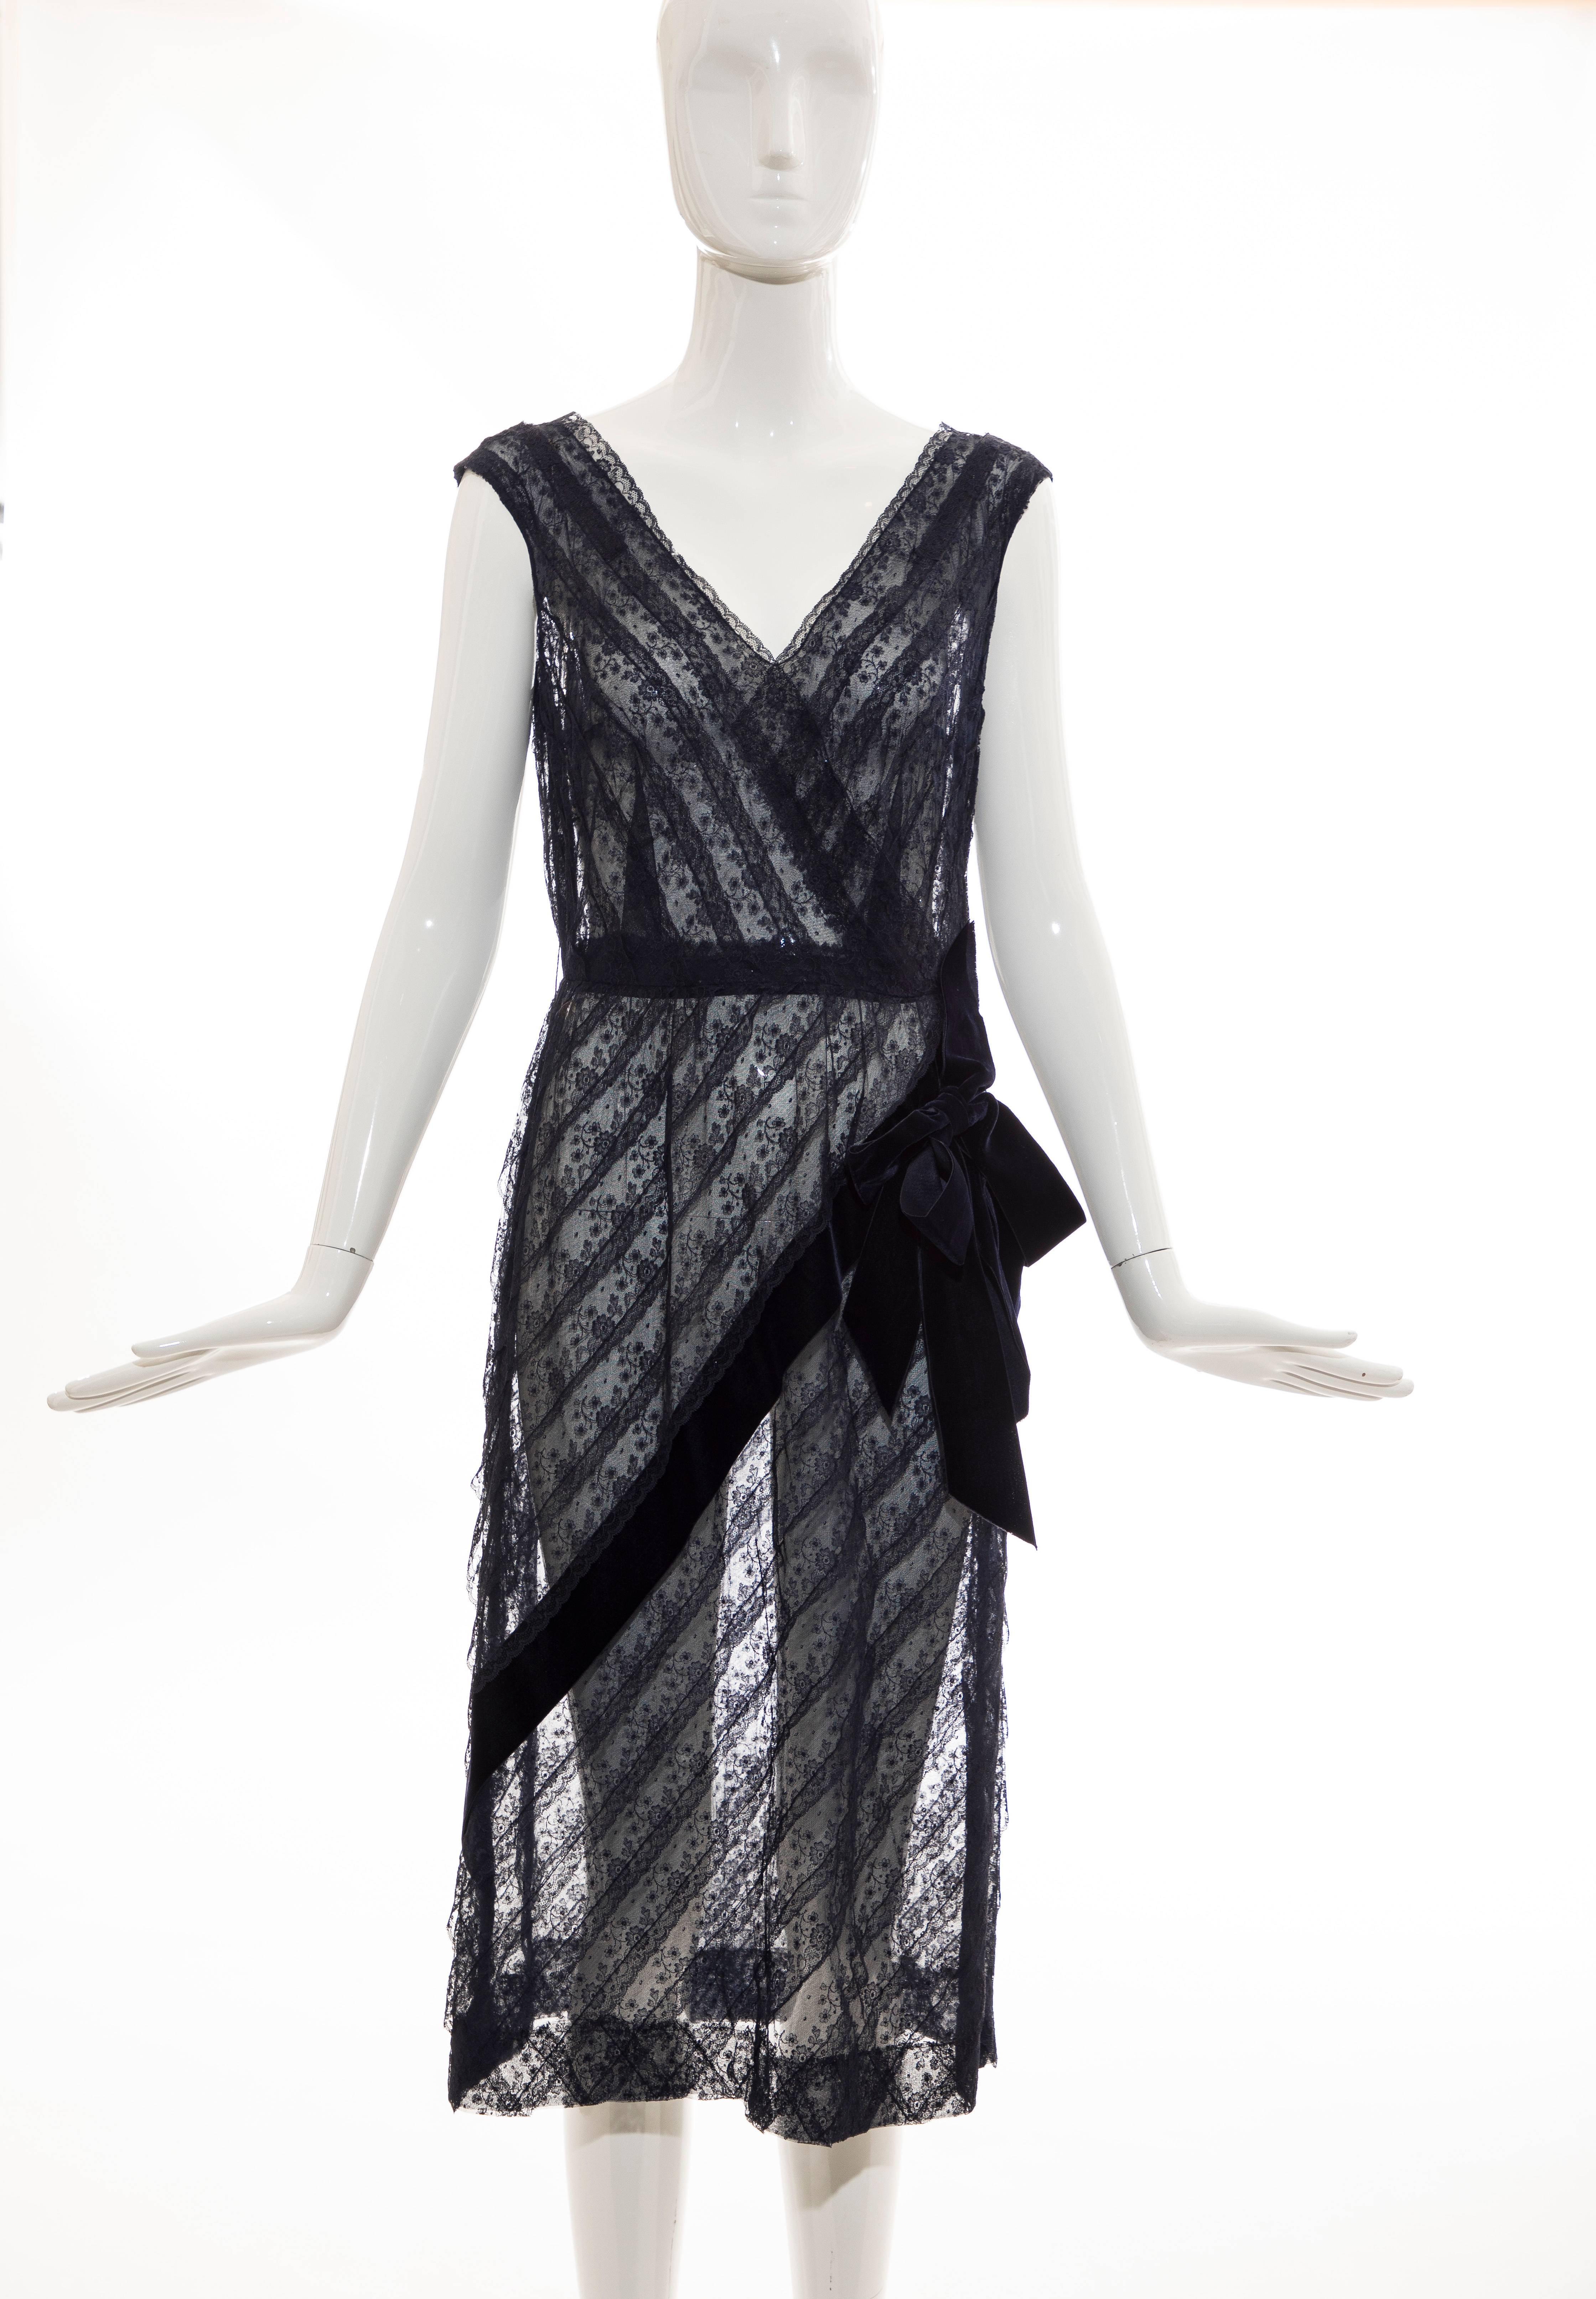 The Gidding Co. Cincinnati, circa: 1950's navy blue lace dress with diagonal navy blue silk velvet, V-Neck, side zip and fully lined.

No Size Label

Bust: 34, Waist: 26, Hips: 36, Length: 43